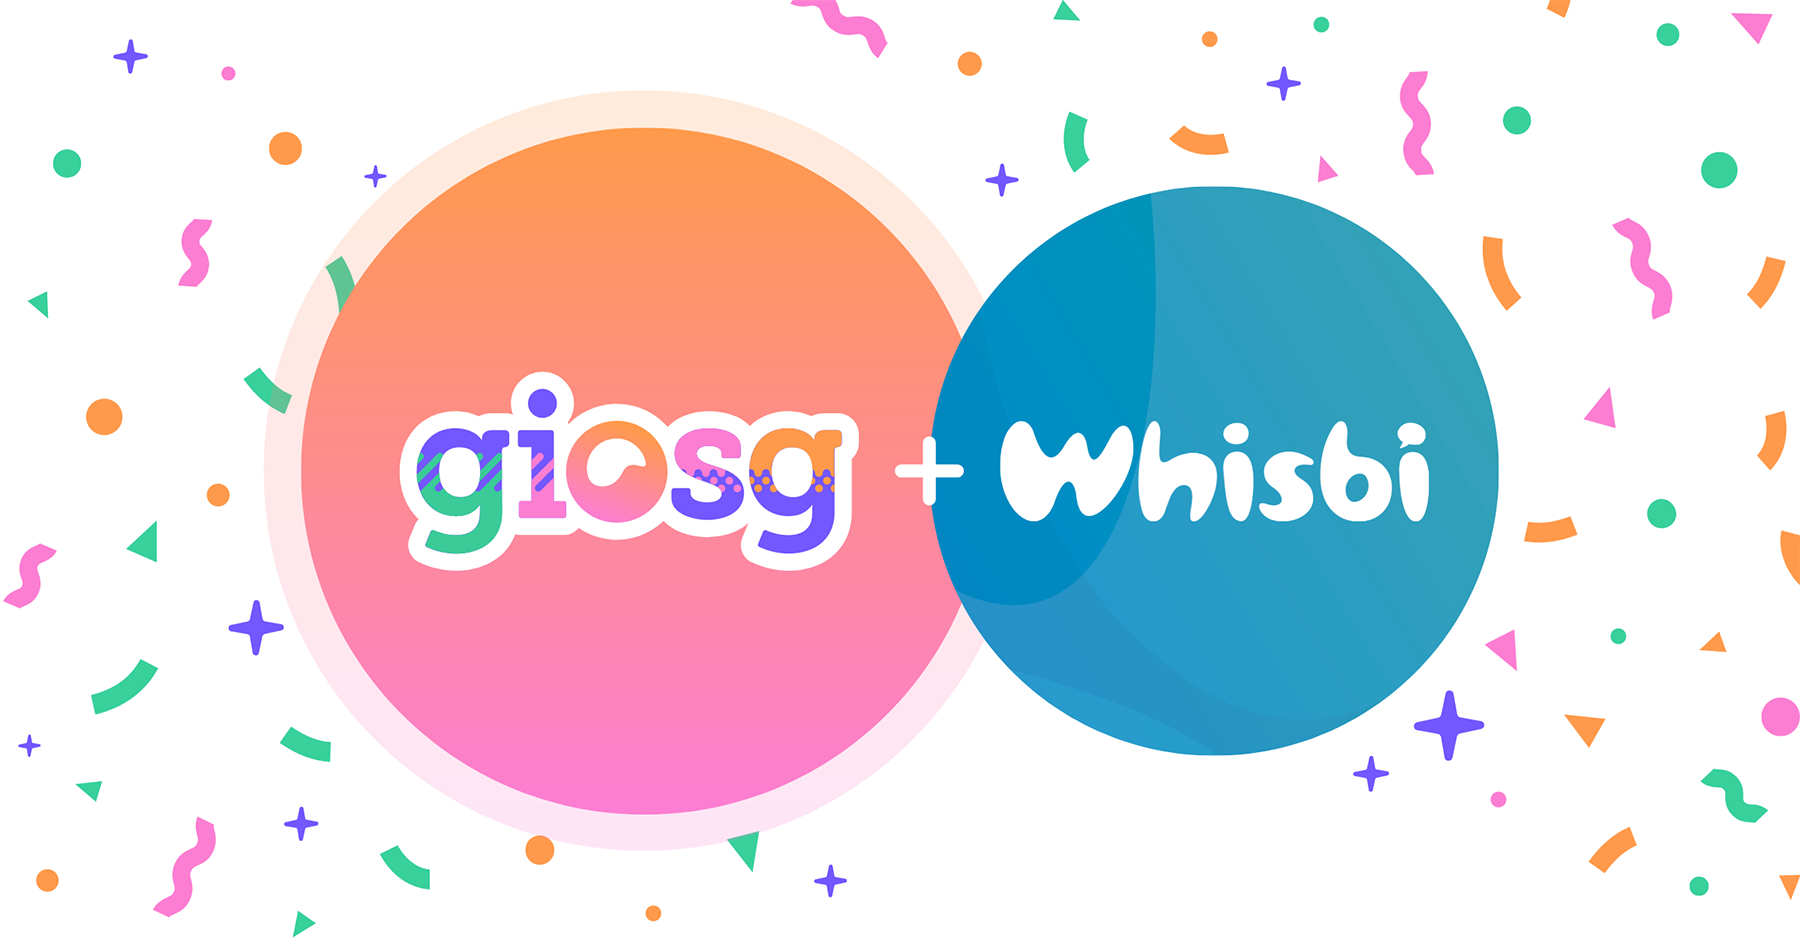 giosg + whisbi (2)